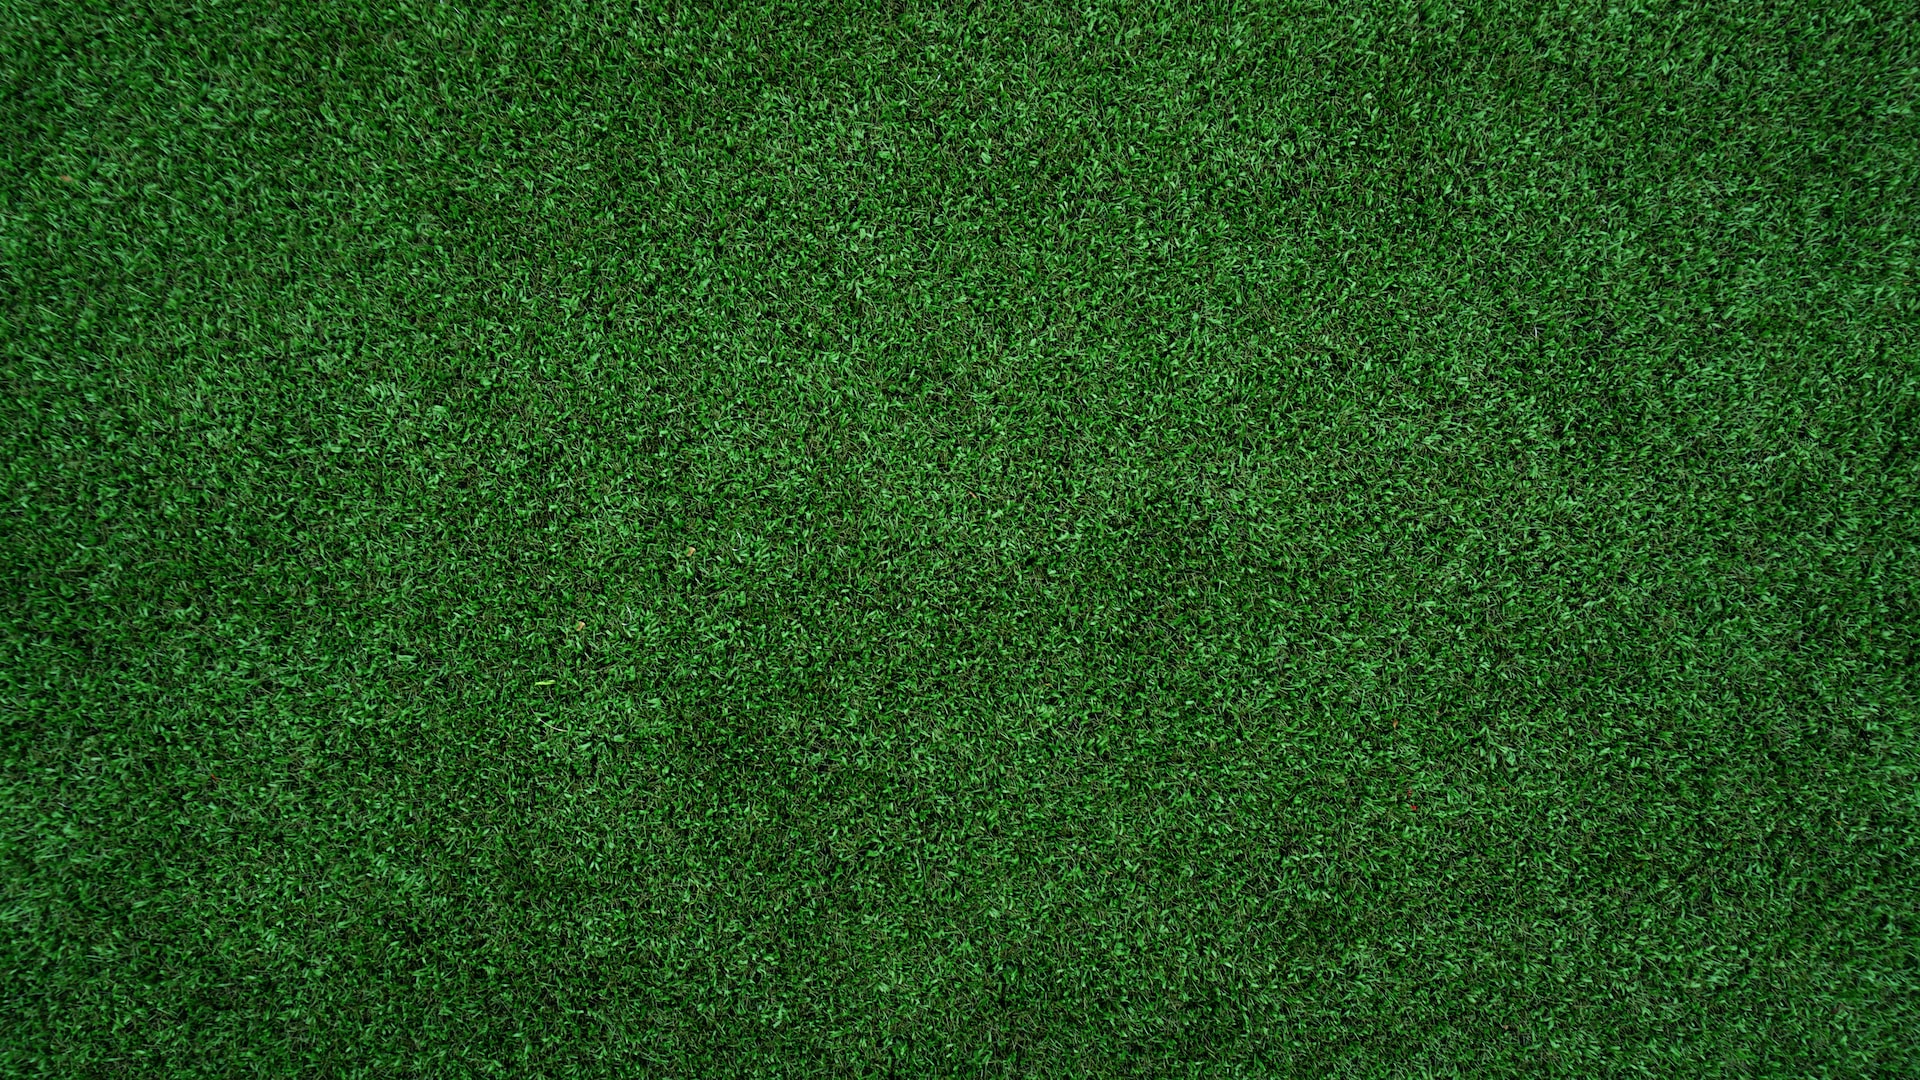 does artificial turf add value to home